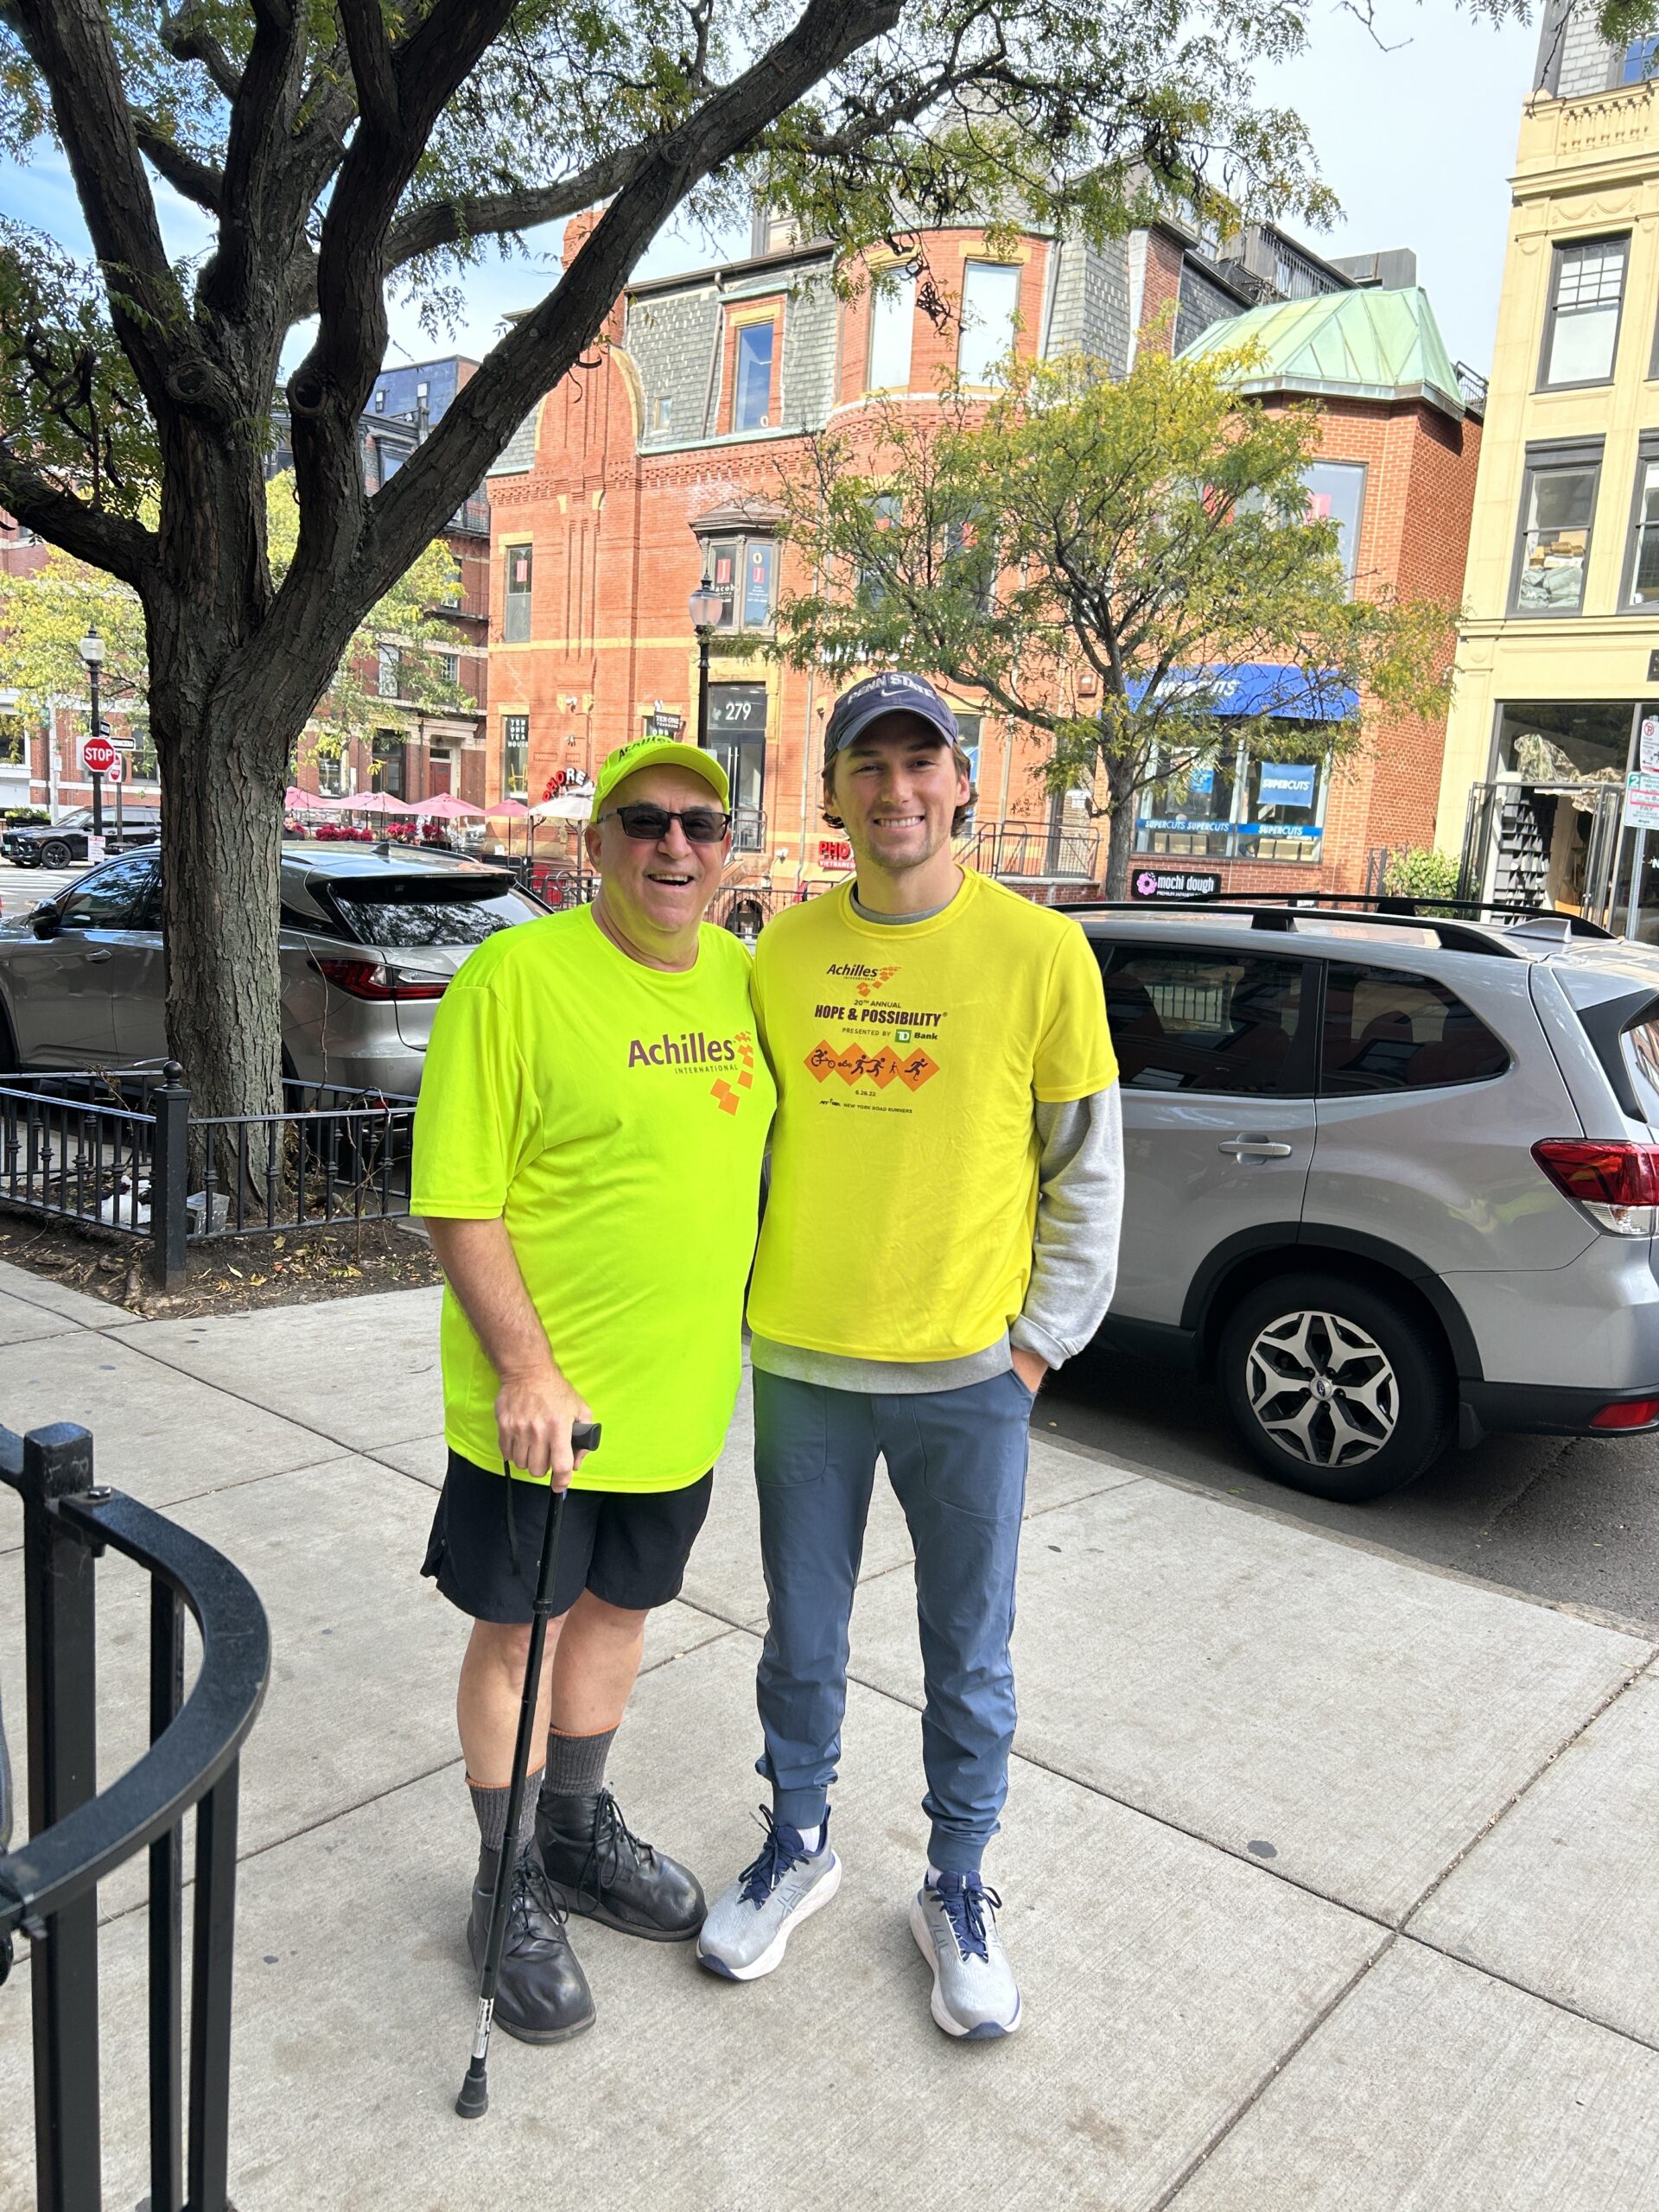 two people in yellow shirts standing next to a tree